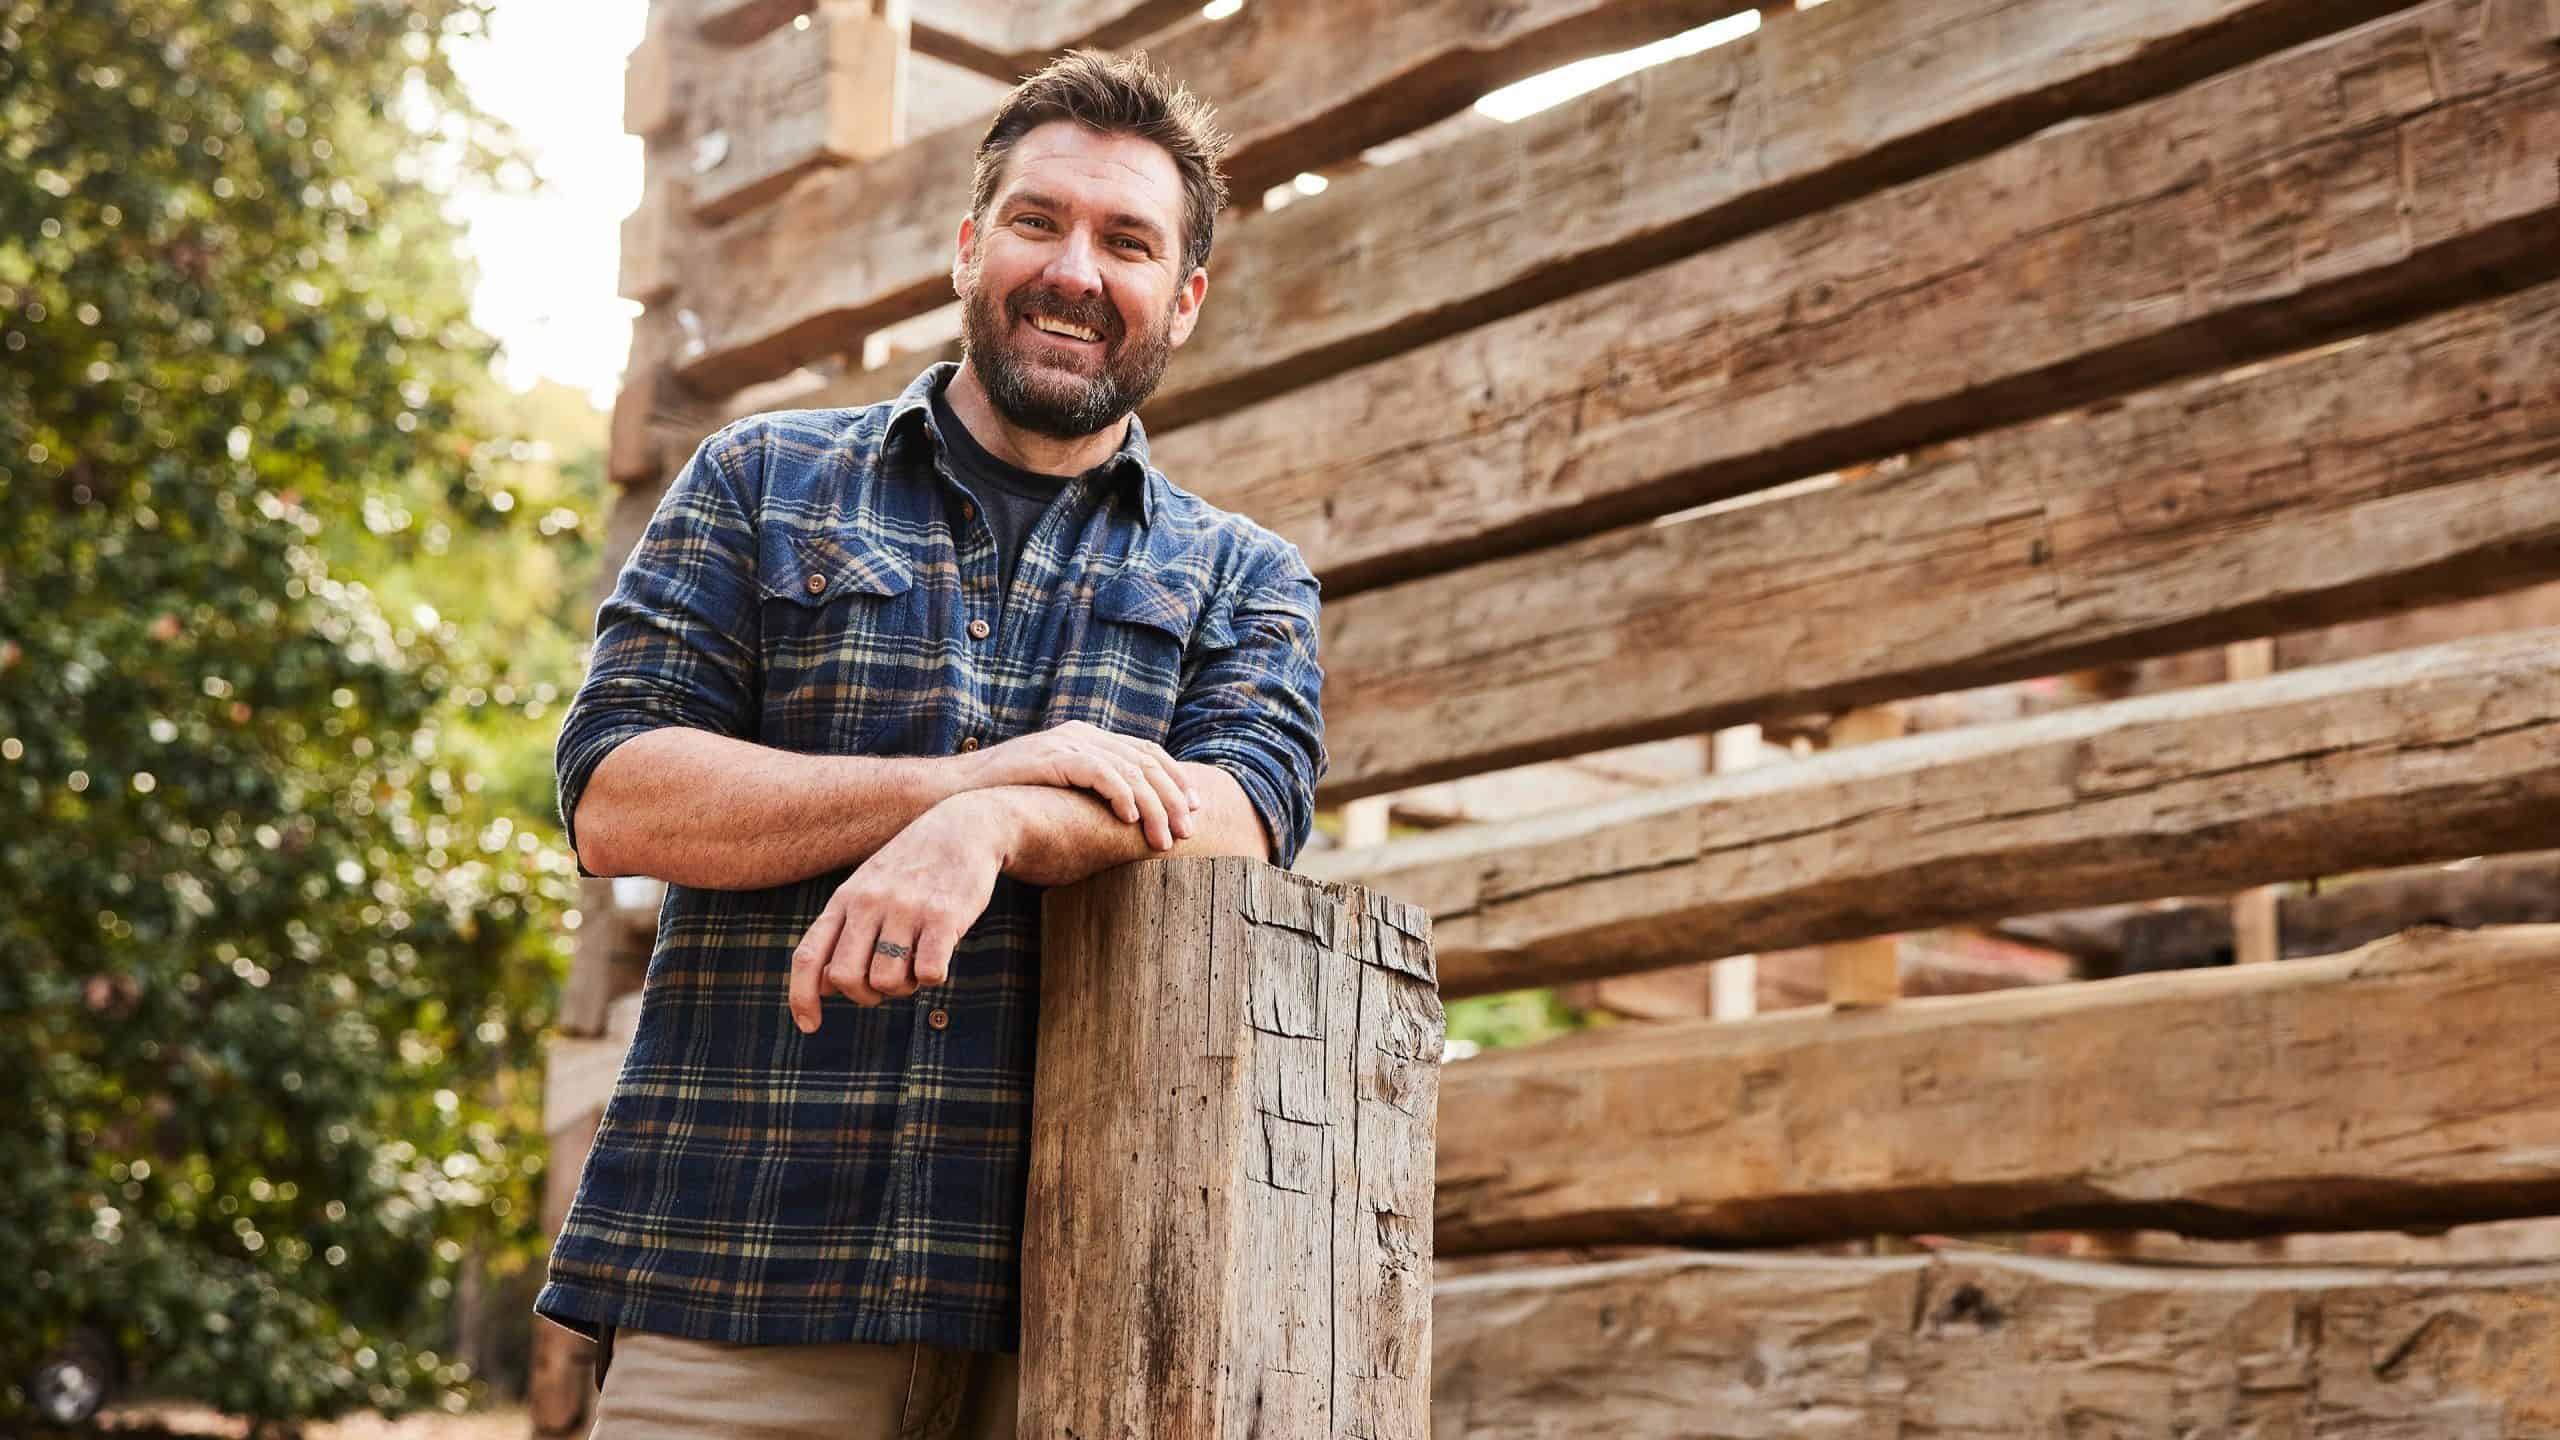 Mark Bowe from the show, Barnwood Builders